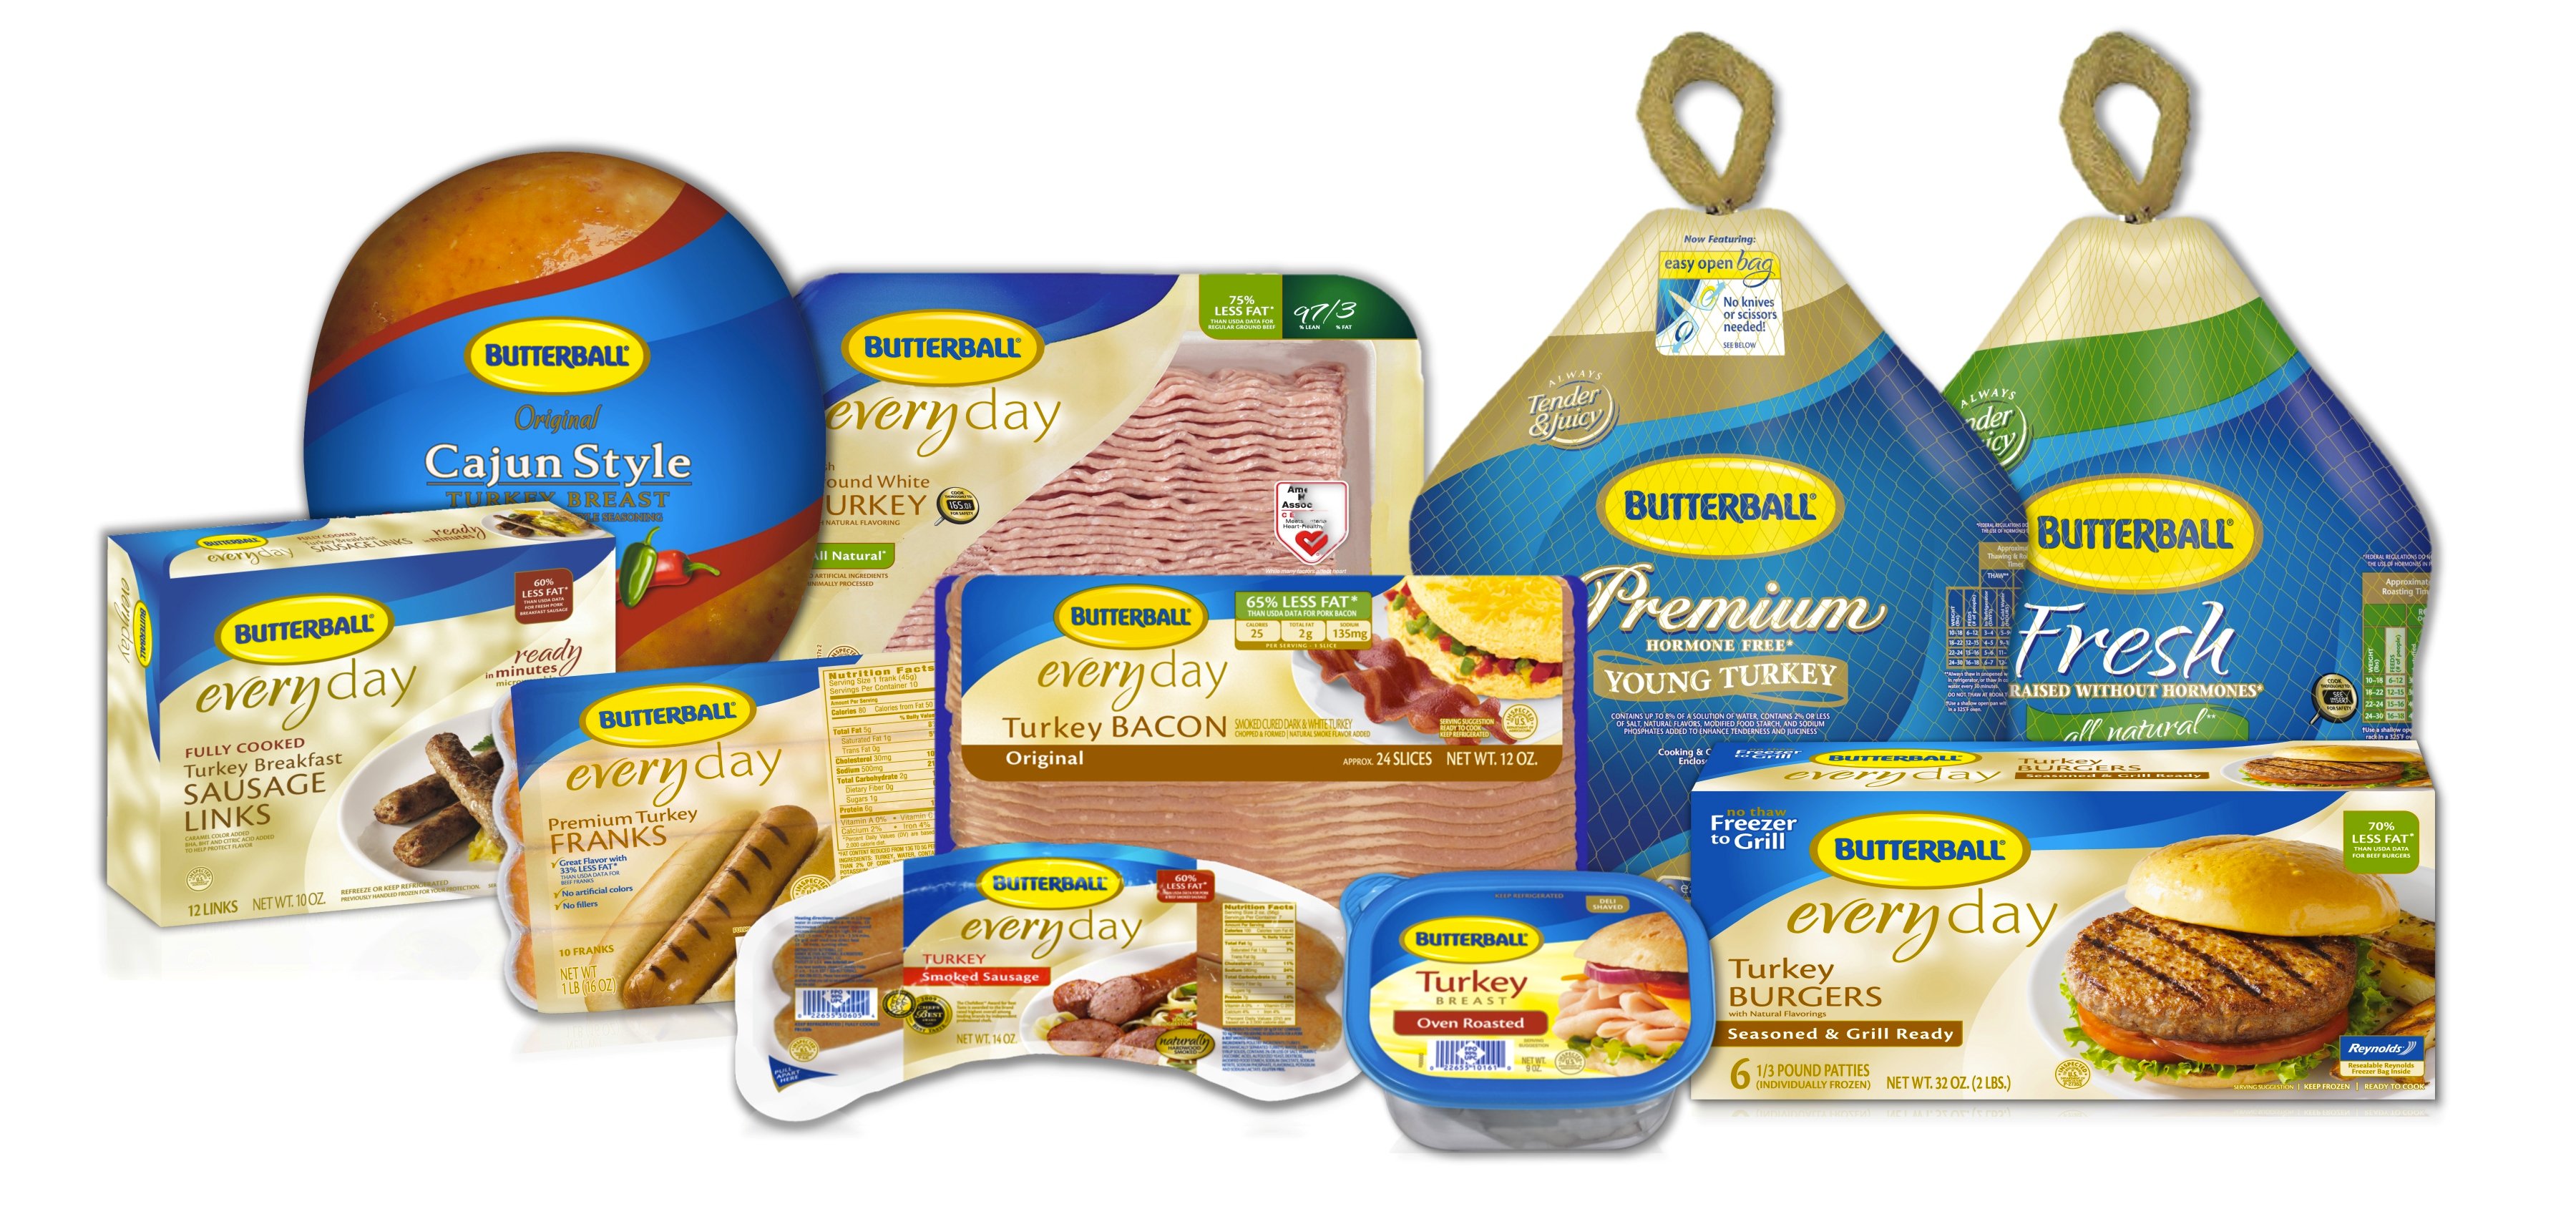 over-5-in-butterball-coupons-available-to-print-turkey-bacon-only-0